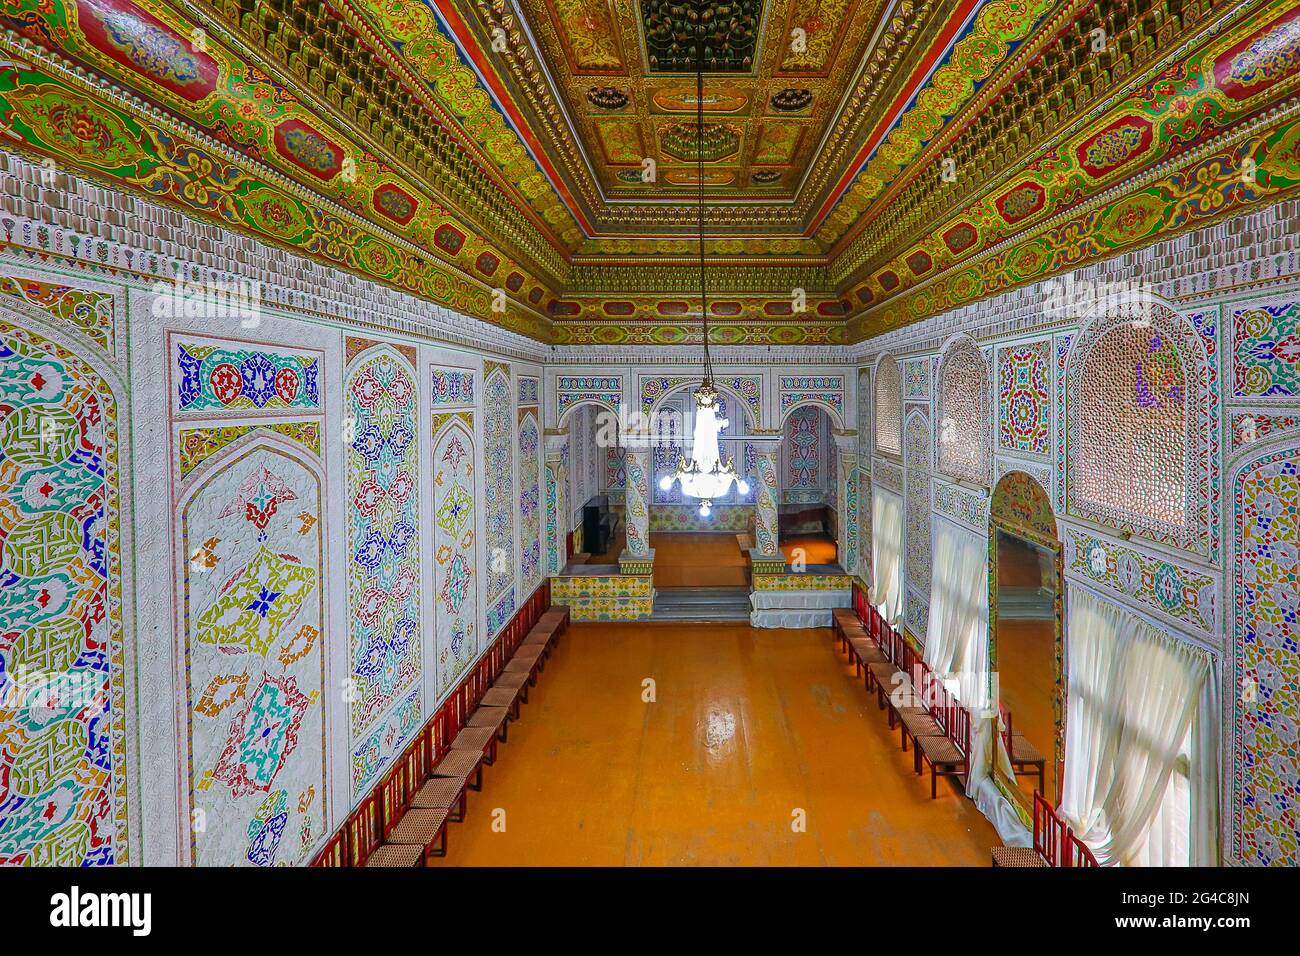 Historical synagogue inside the ancient residence of a local jewish man, in Samarkand, Uzbekistan. Stock Photo